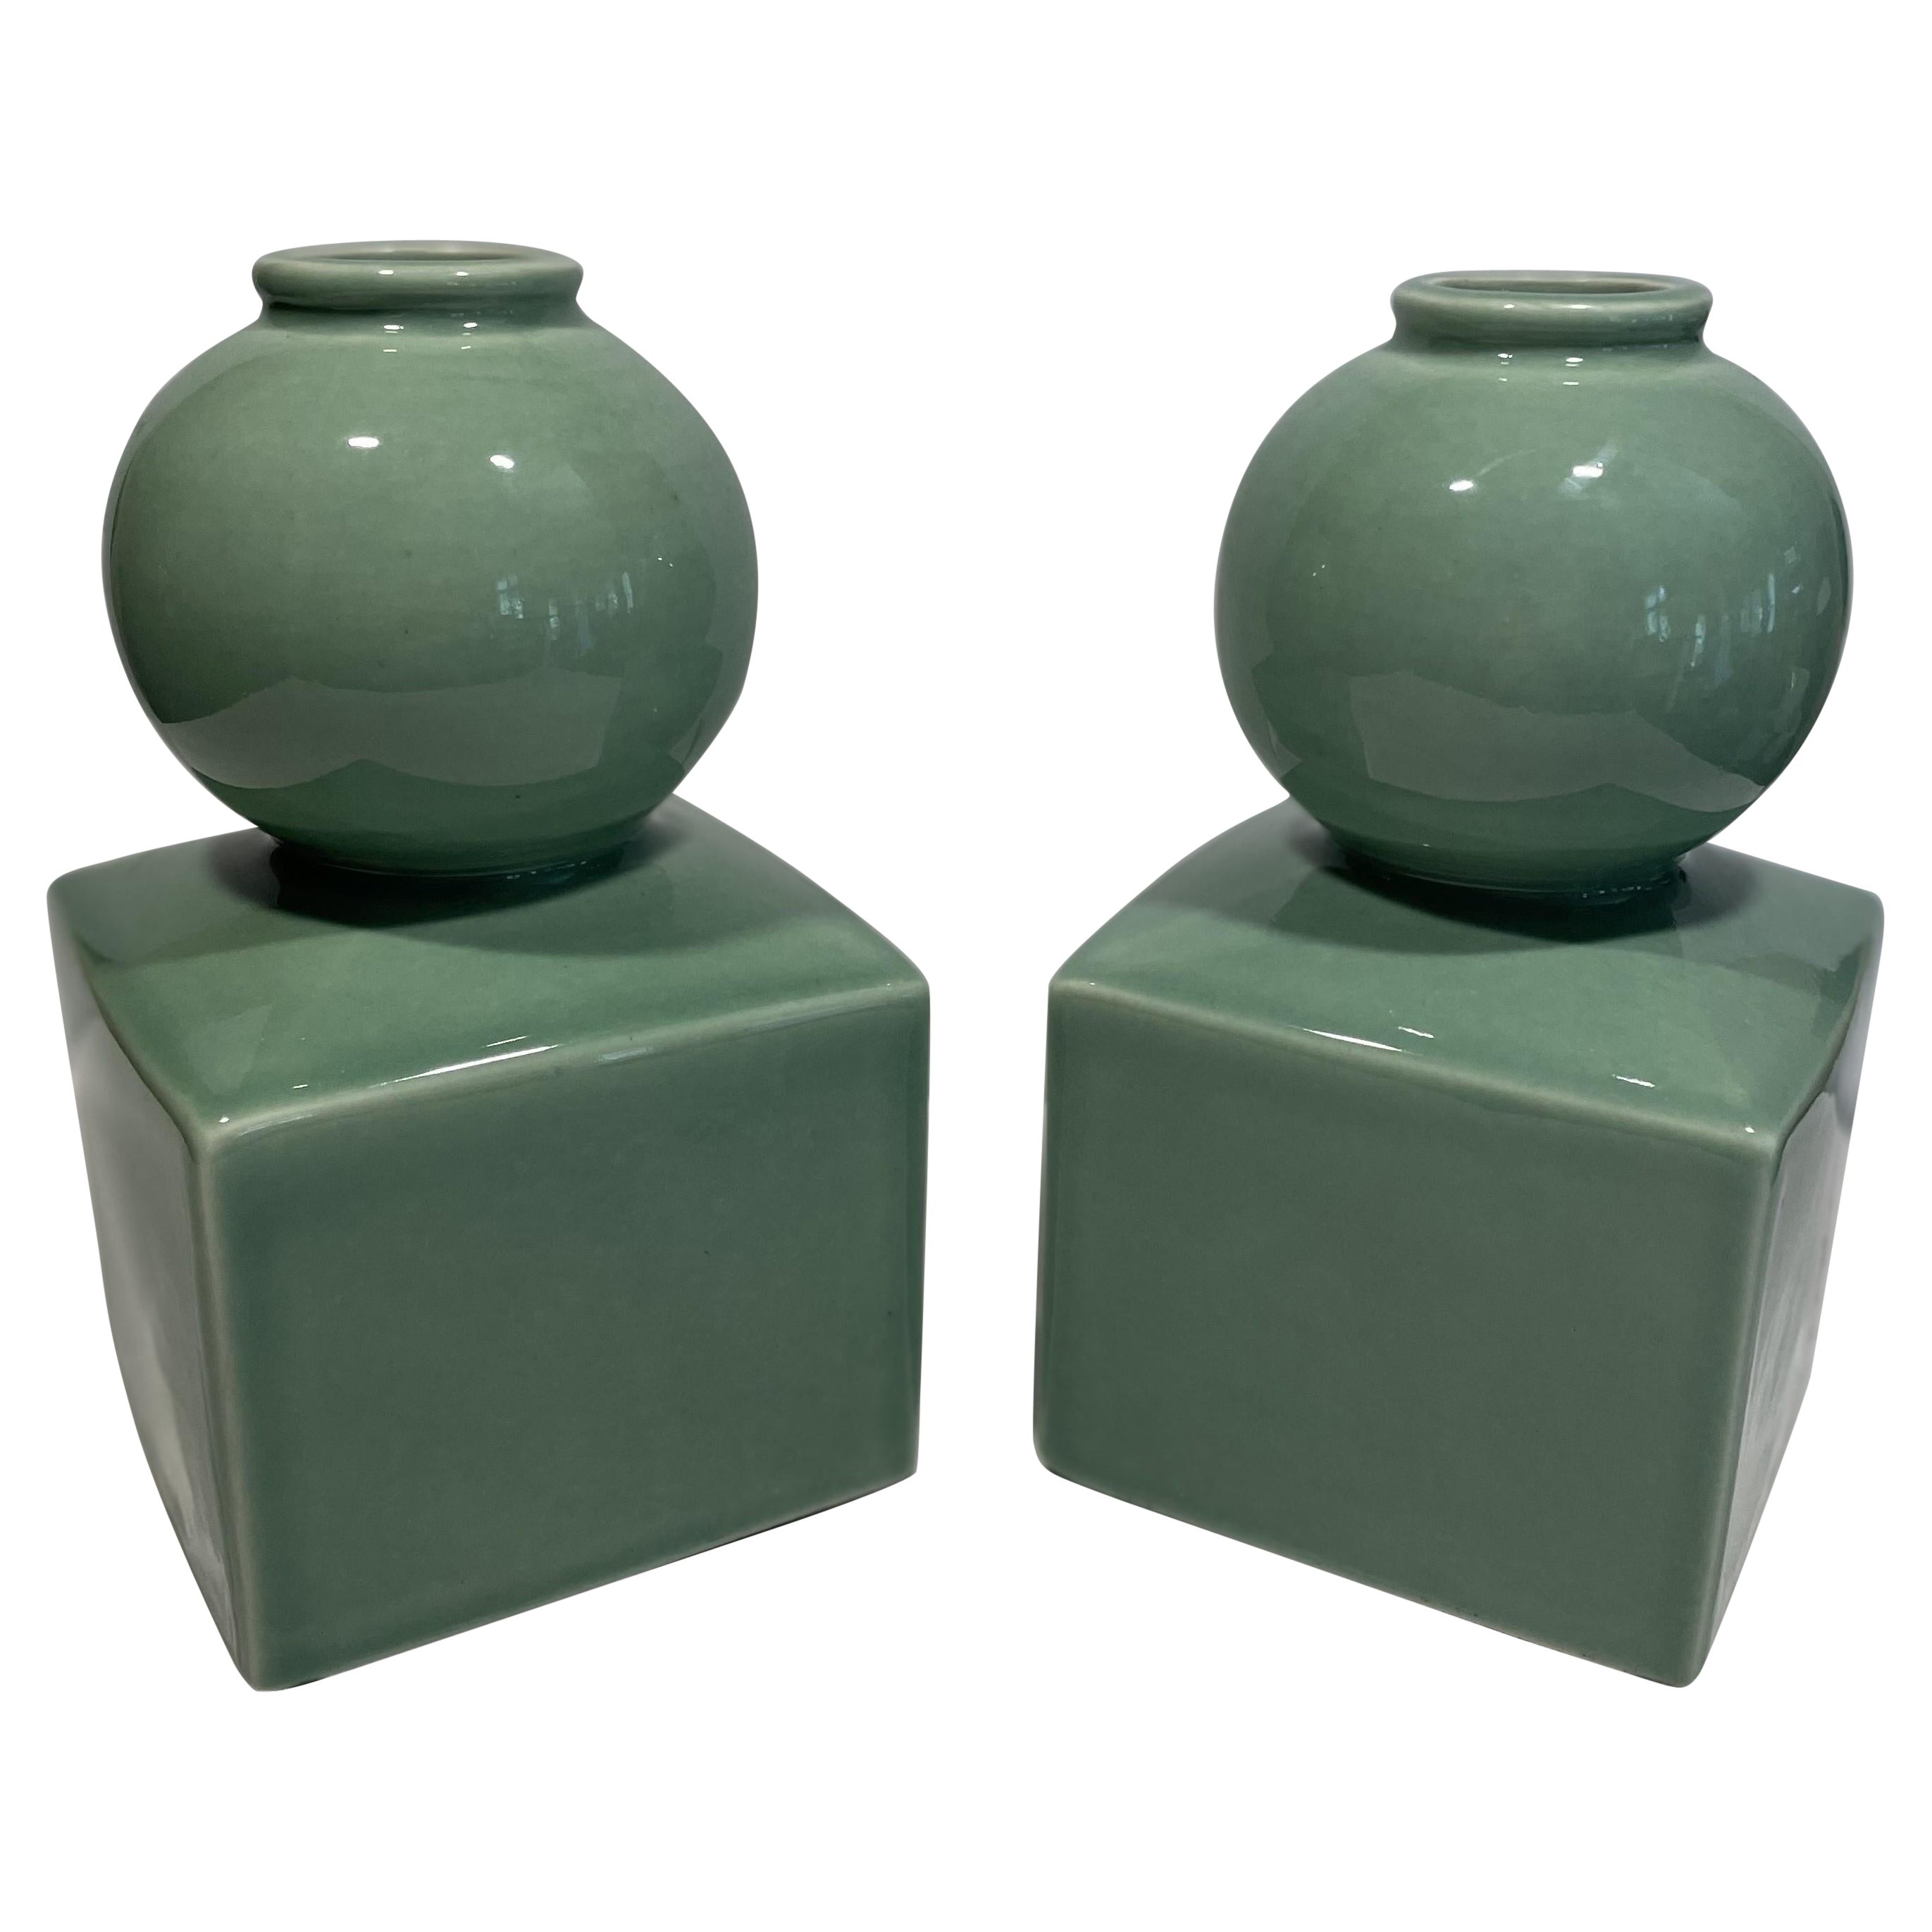 Celadon Ceramic Vases or Bookends Attributed to Serena & Lily -- A Pair For Sale